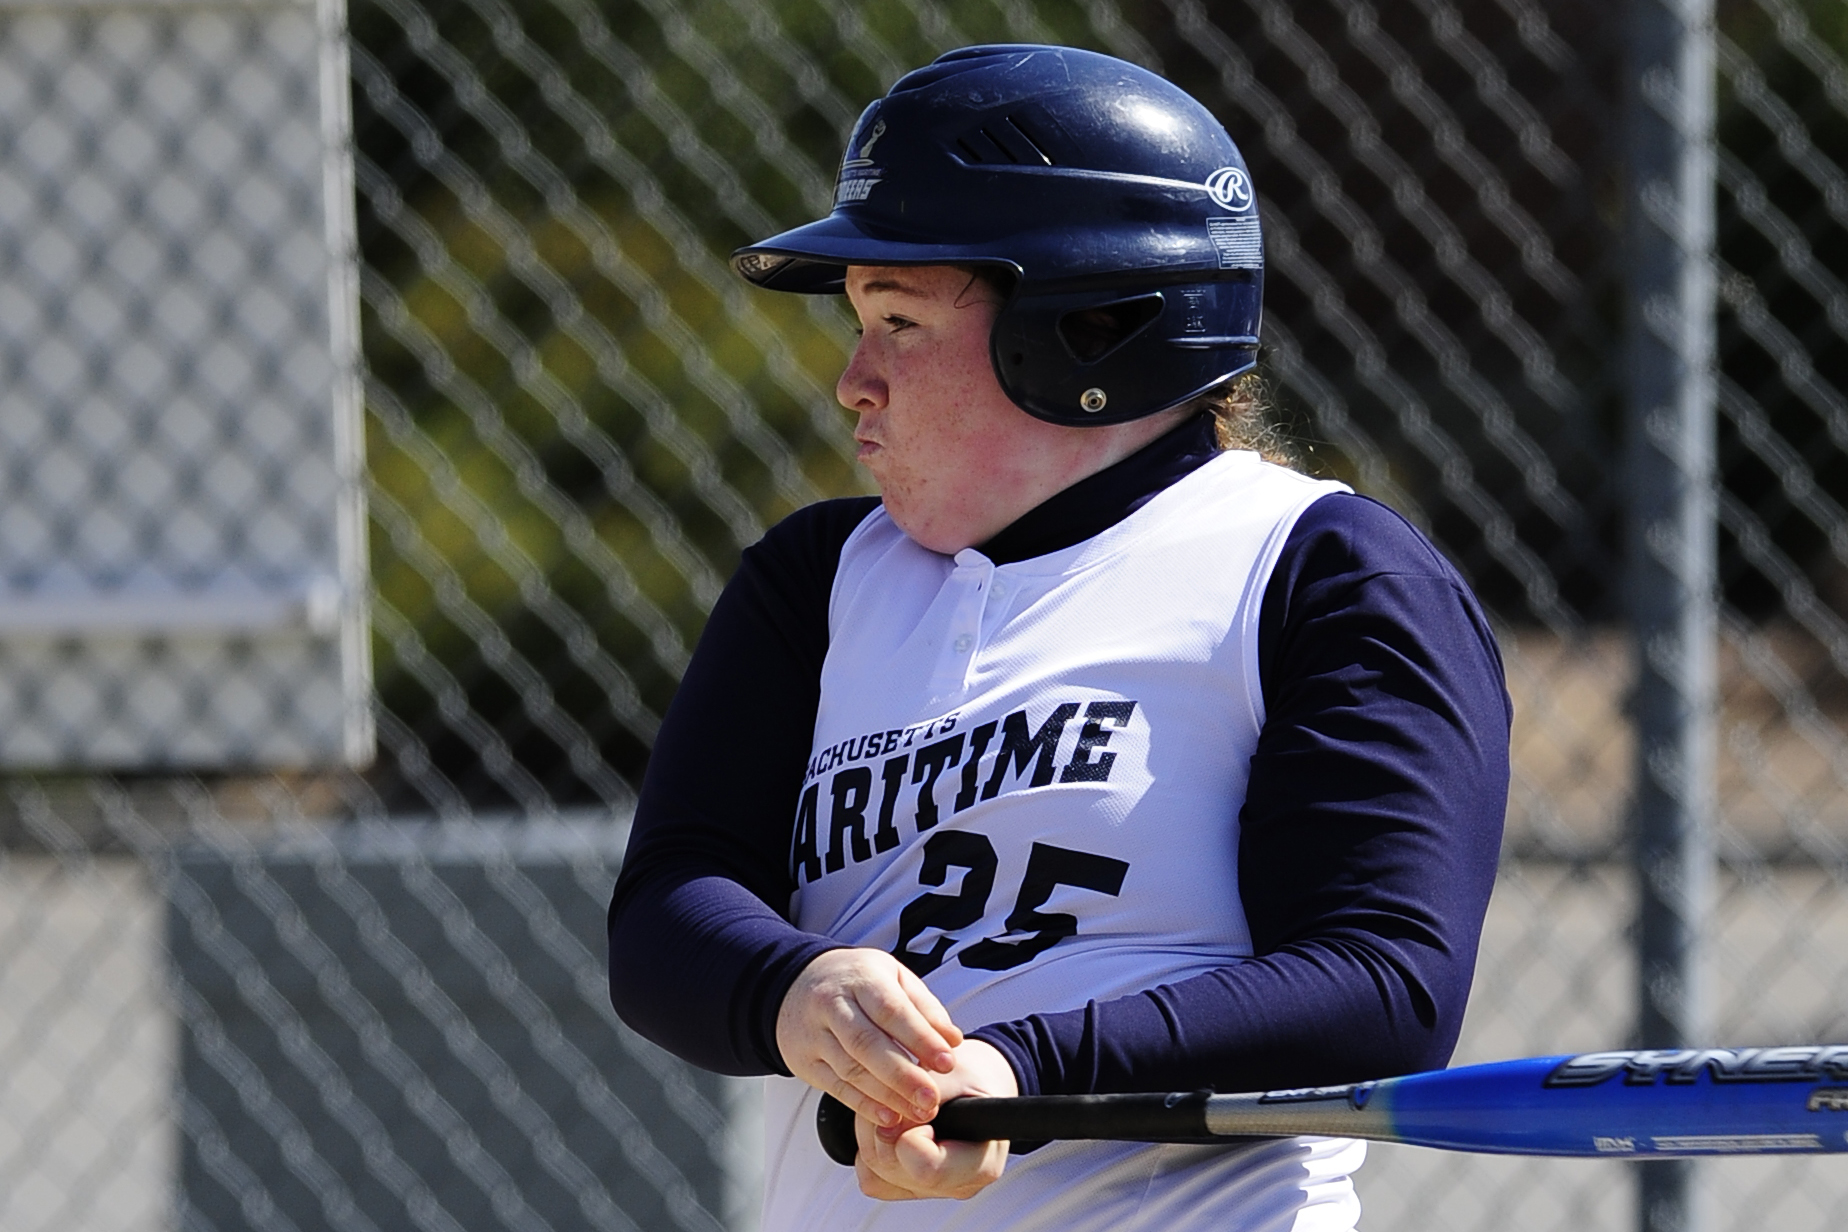 McLaughlin, Buck, Thibeault And Johnson Collect Singles As Softball Closes Out Season With MASCAC Twinbill Setback At Westfield State